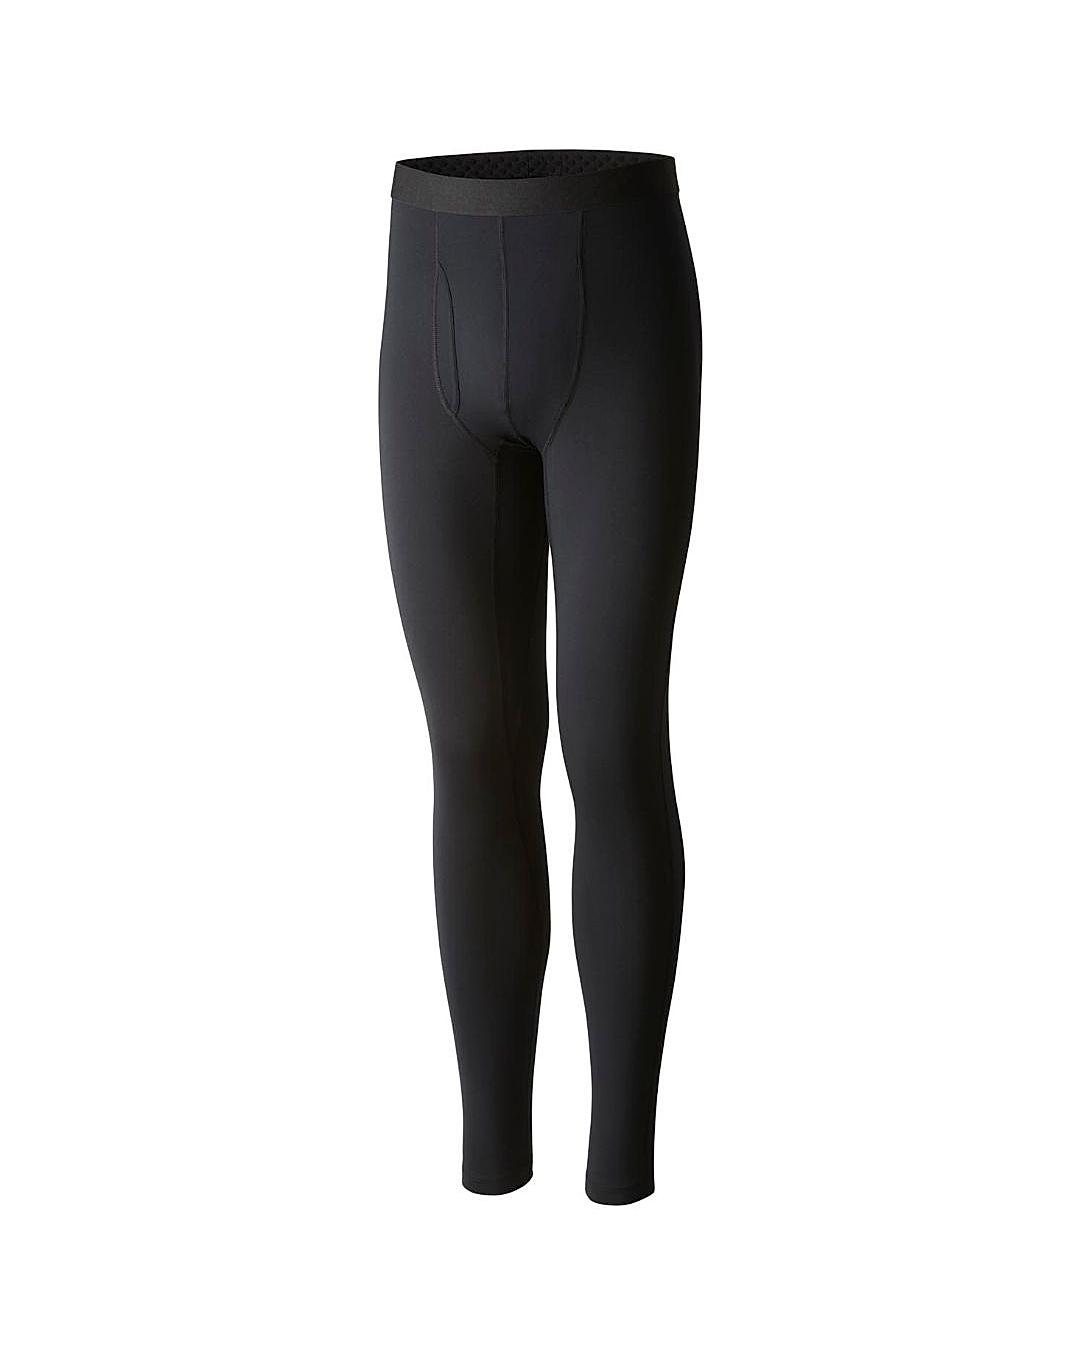 Buy Columbia Black Midweight Stretch Tight For Men Online at Adventuras